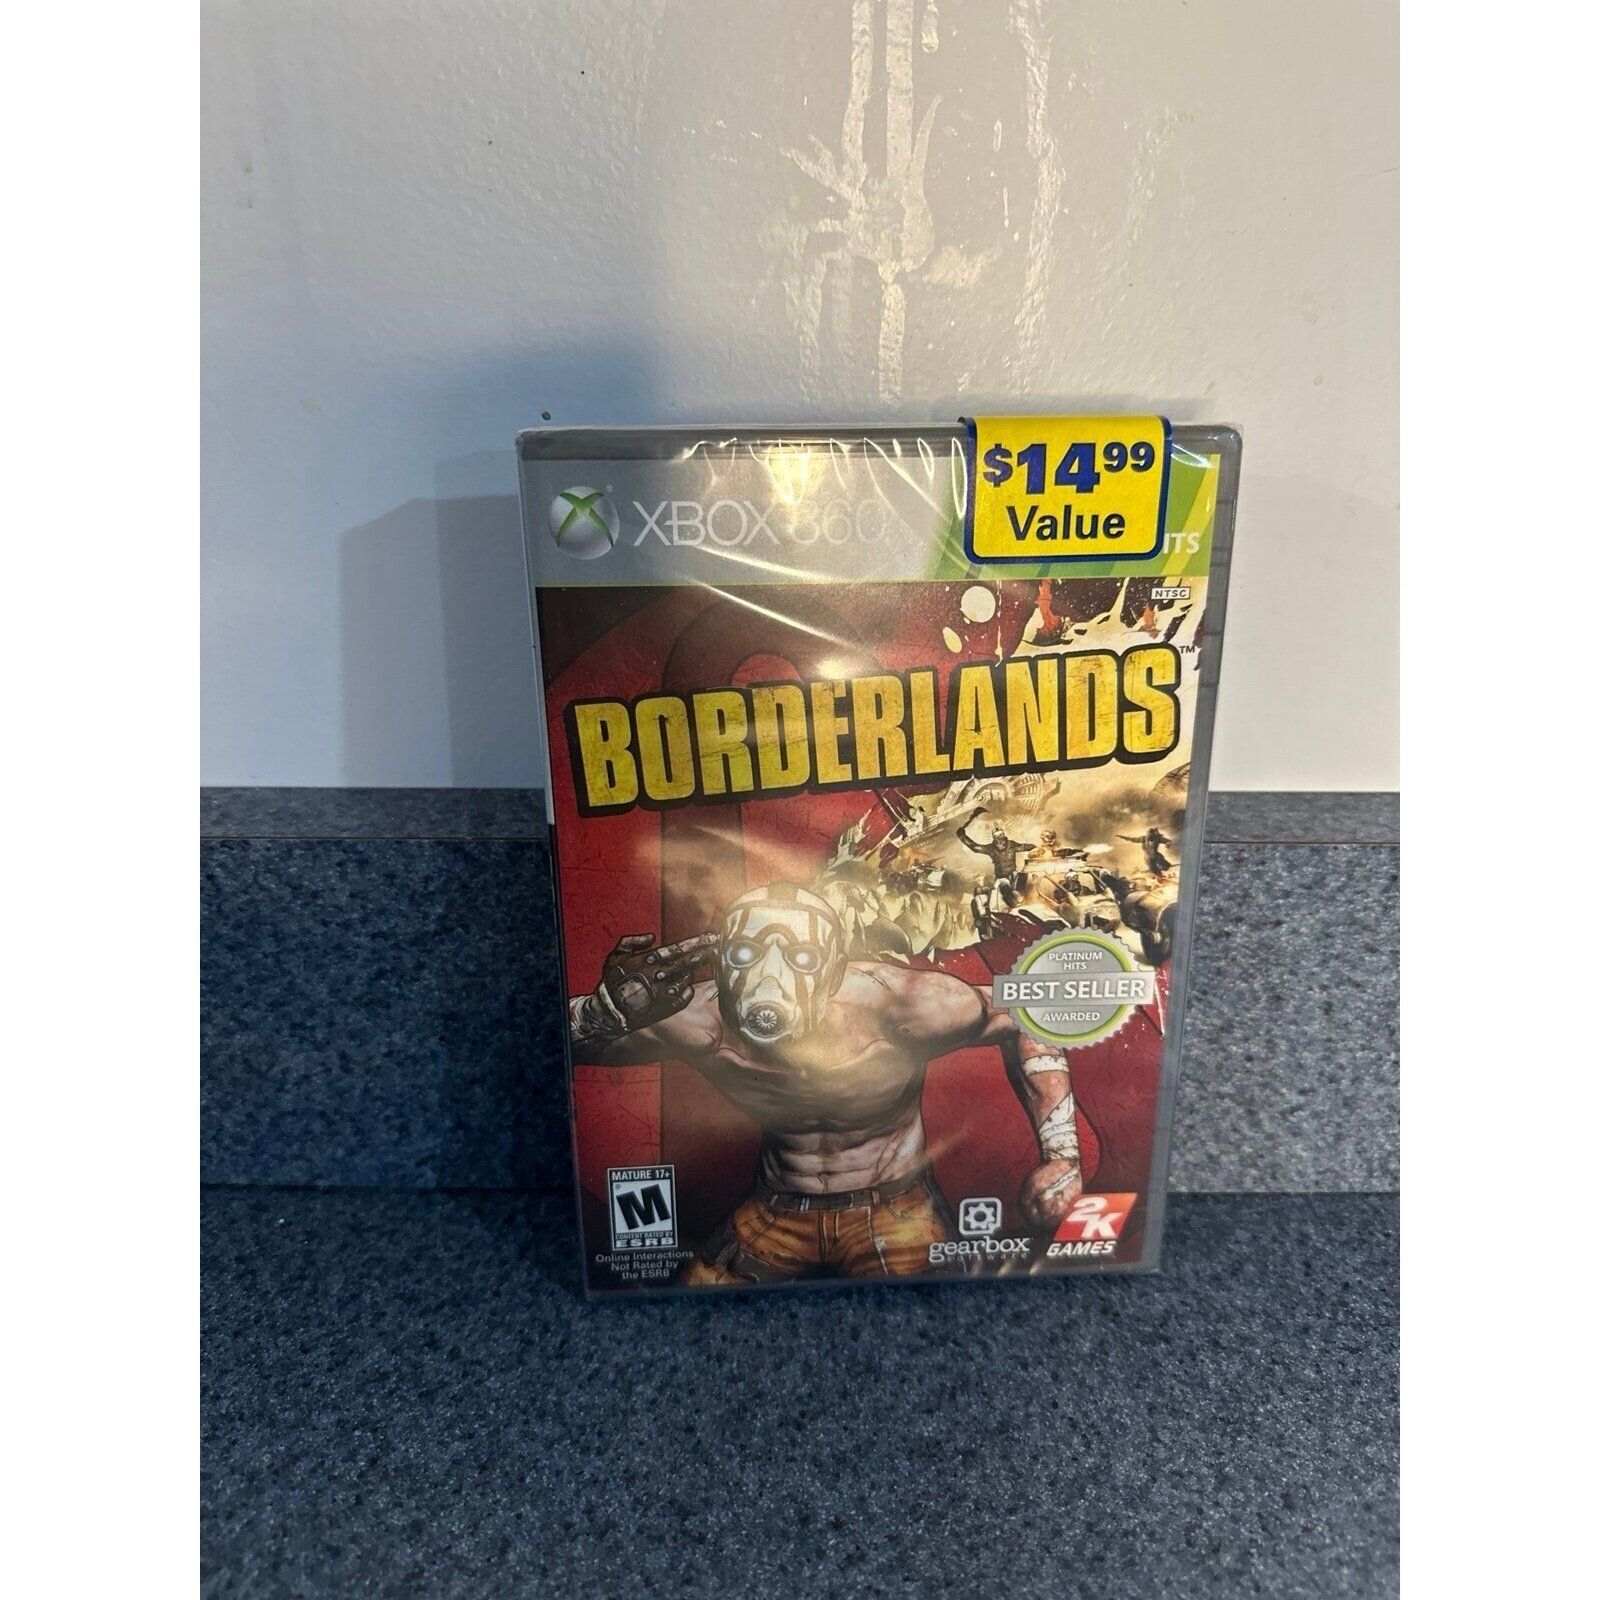 Primary image for Borderlands Platinum Hits Video Game Brand New/Still In The Package Xbox 360